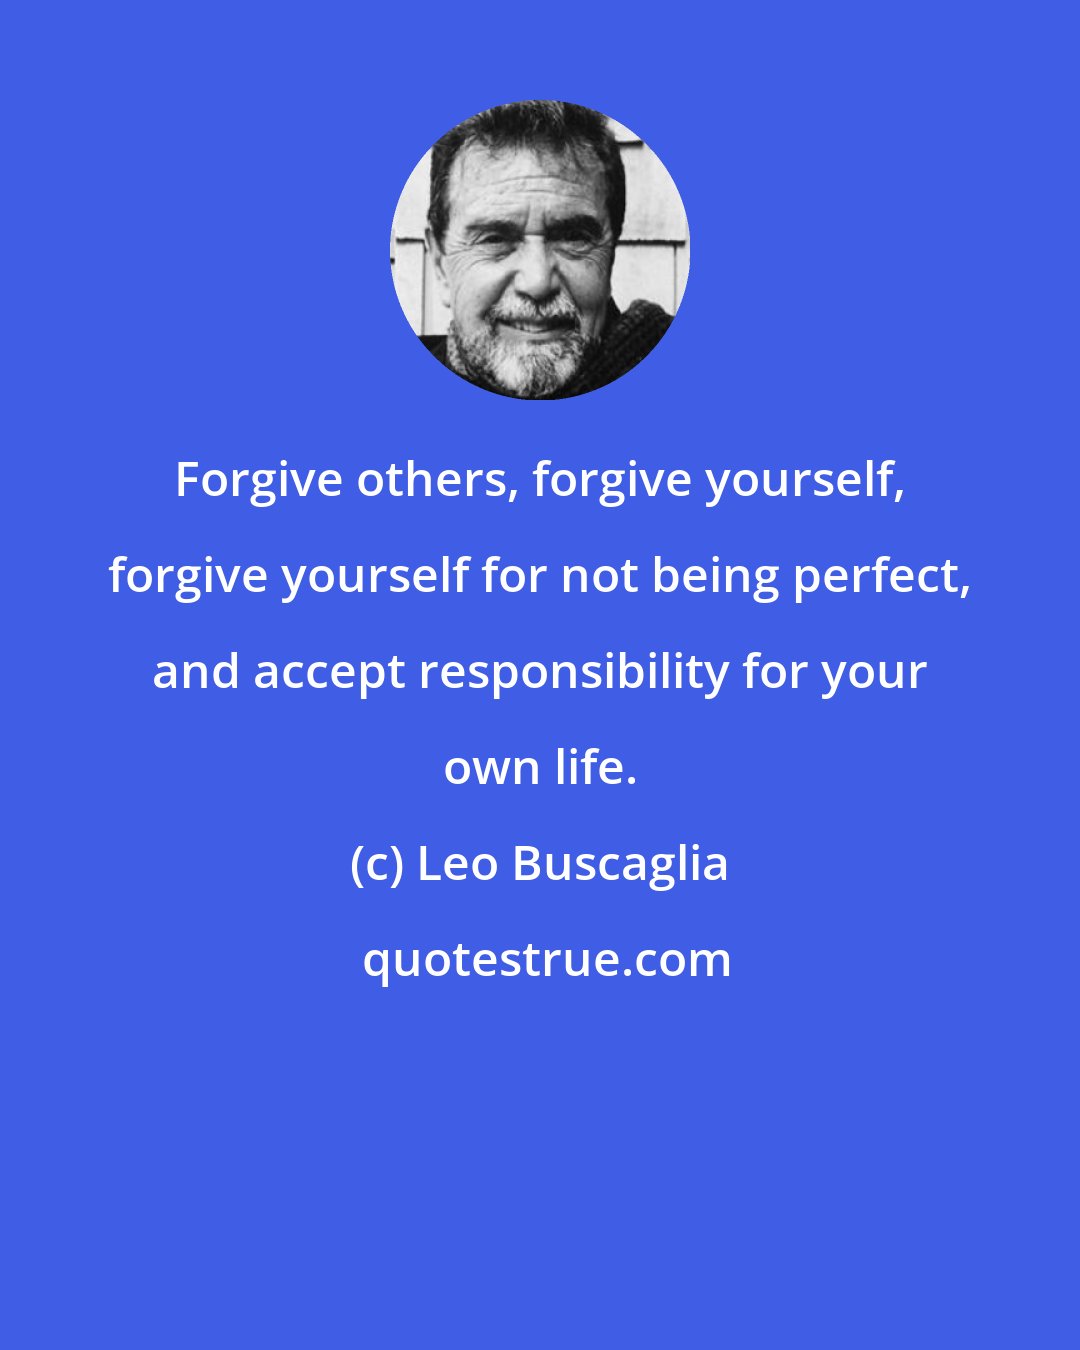 Leo Buscaglia: Forgive others, forgive yourself, forgive yourself for not being perfect, and accept responsibility for your own life.